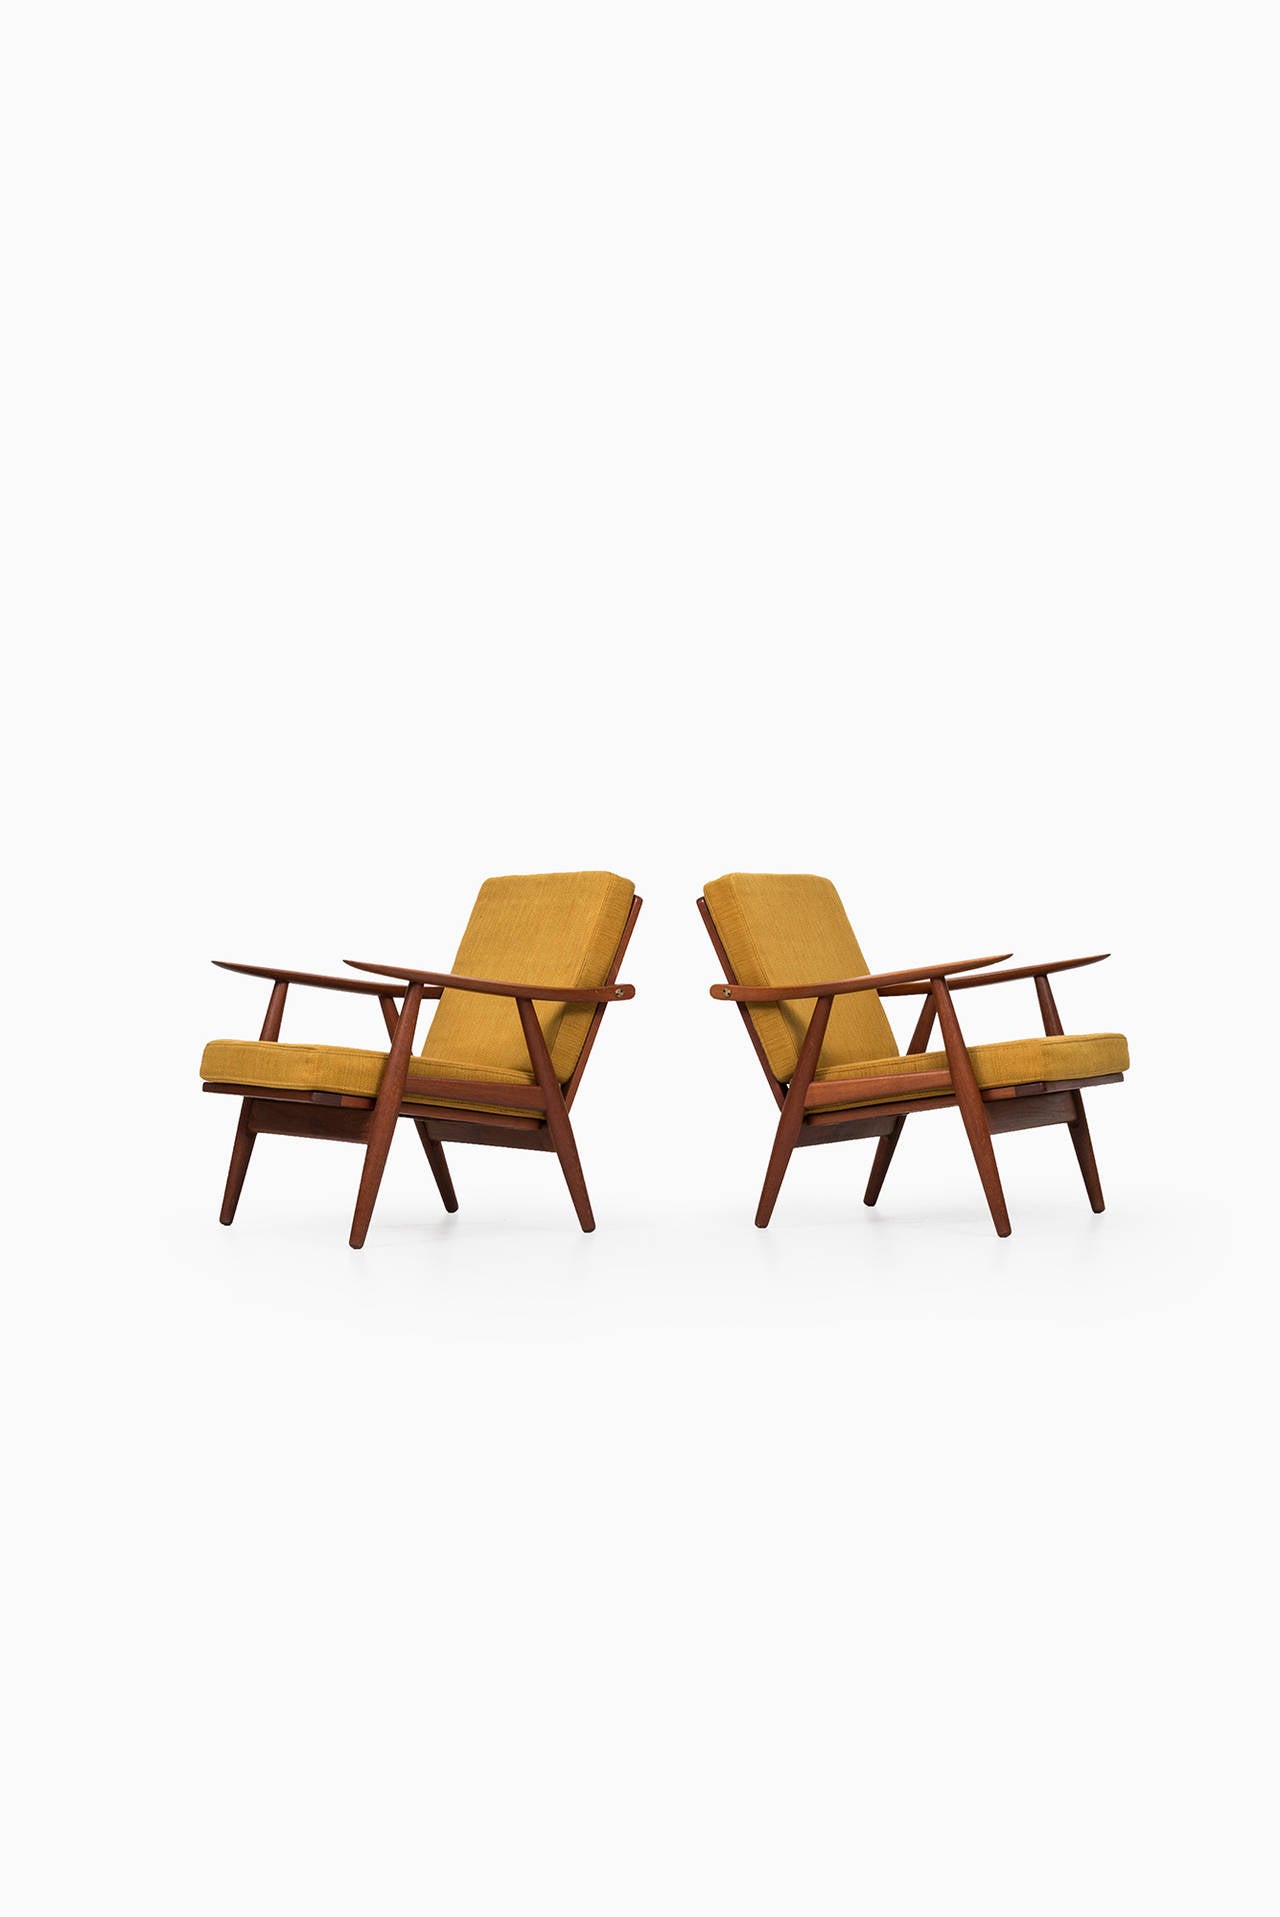 A pair of easy chairs model GE-270 designed by Hans Wegner. Produced by Getama in Denmark. Teak, brass and original yellow fabric.